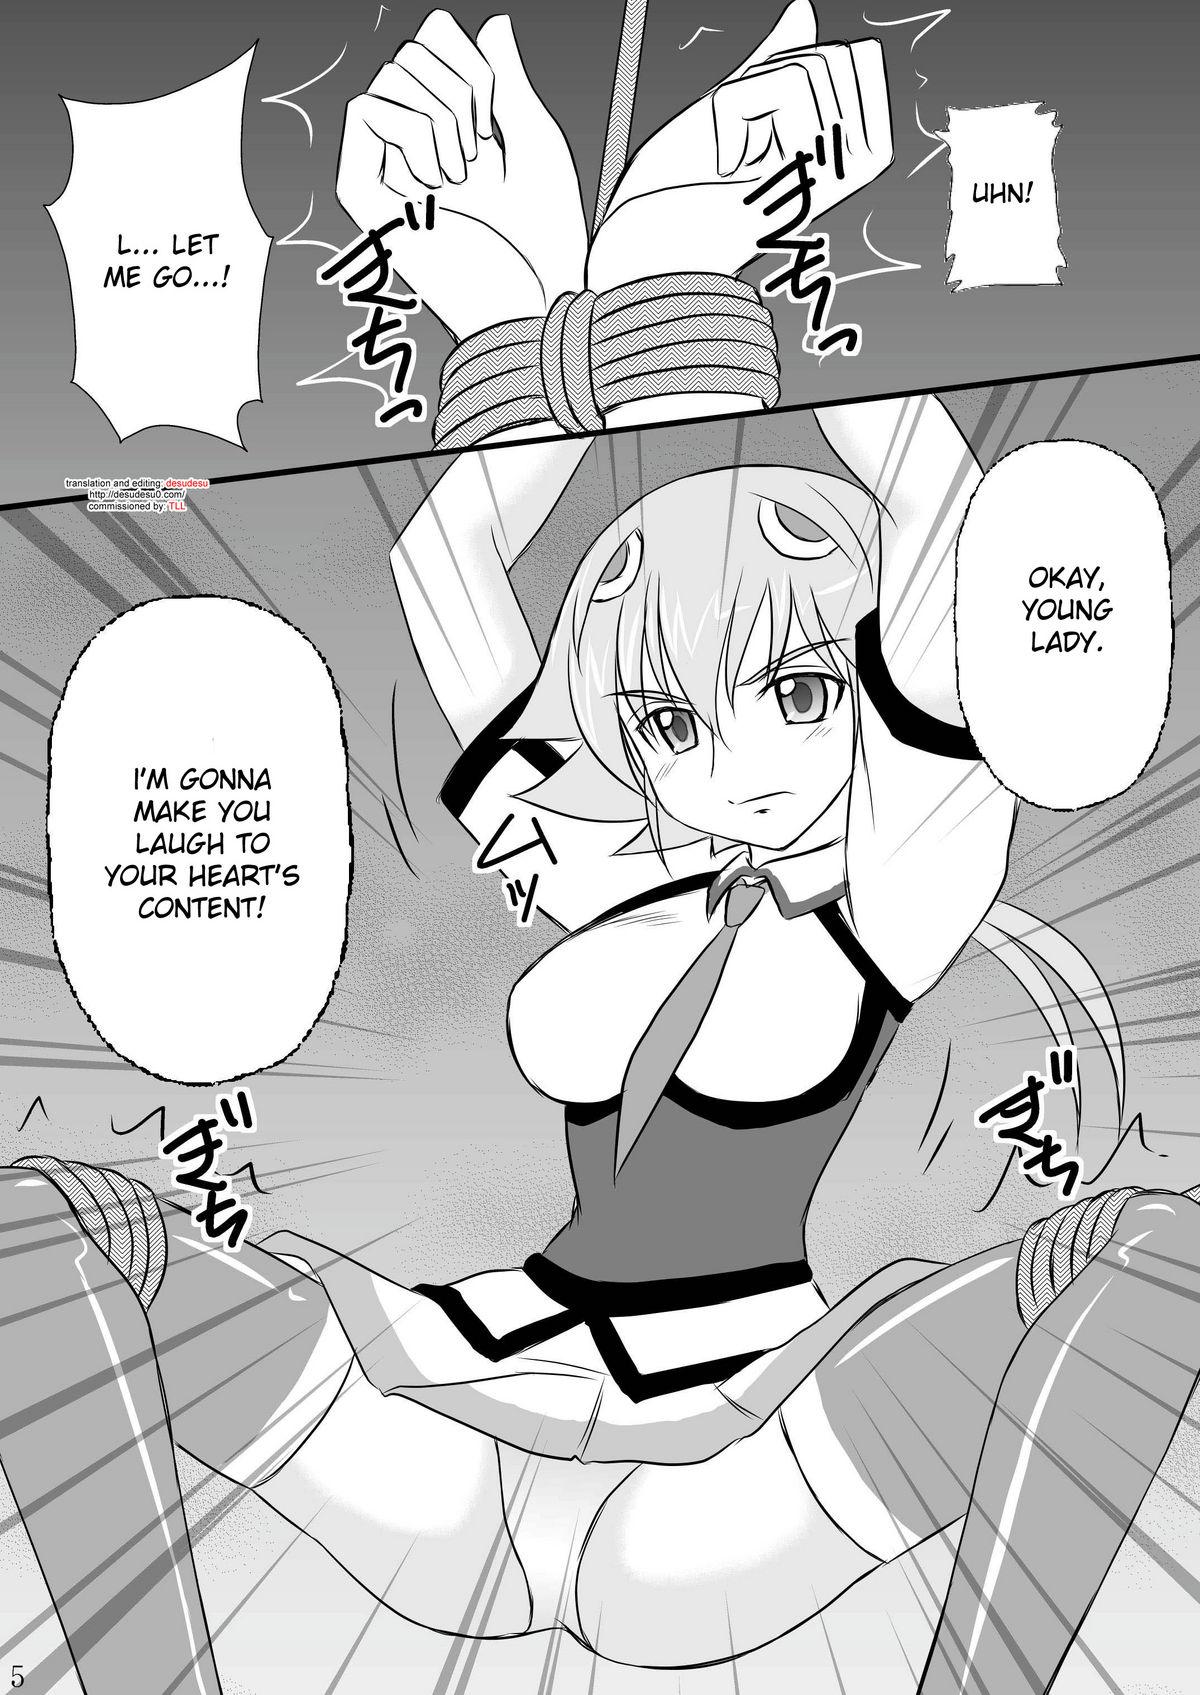 Family Porn Rape and tickle test until one loses her sanity - Sora wo kakeru shoujo Lovers - Page 5